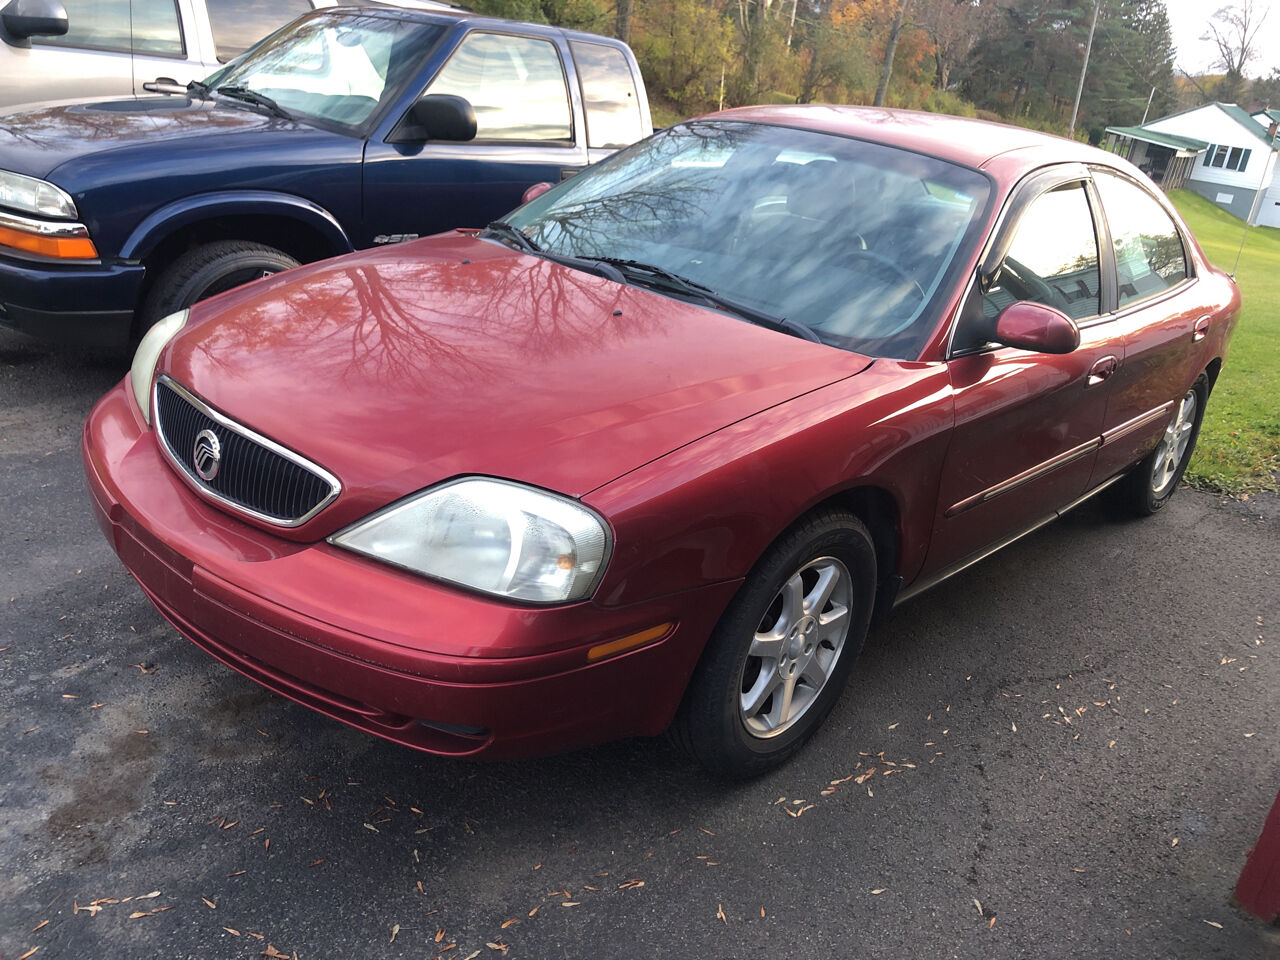 2001 Mercury Sable For Sale In Martinsburg, WV - Carsforsale.com®